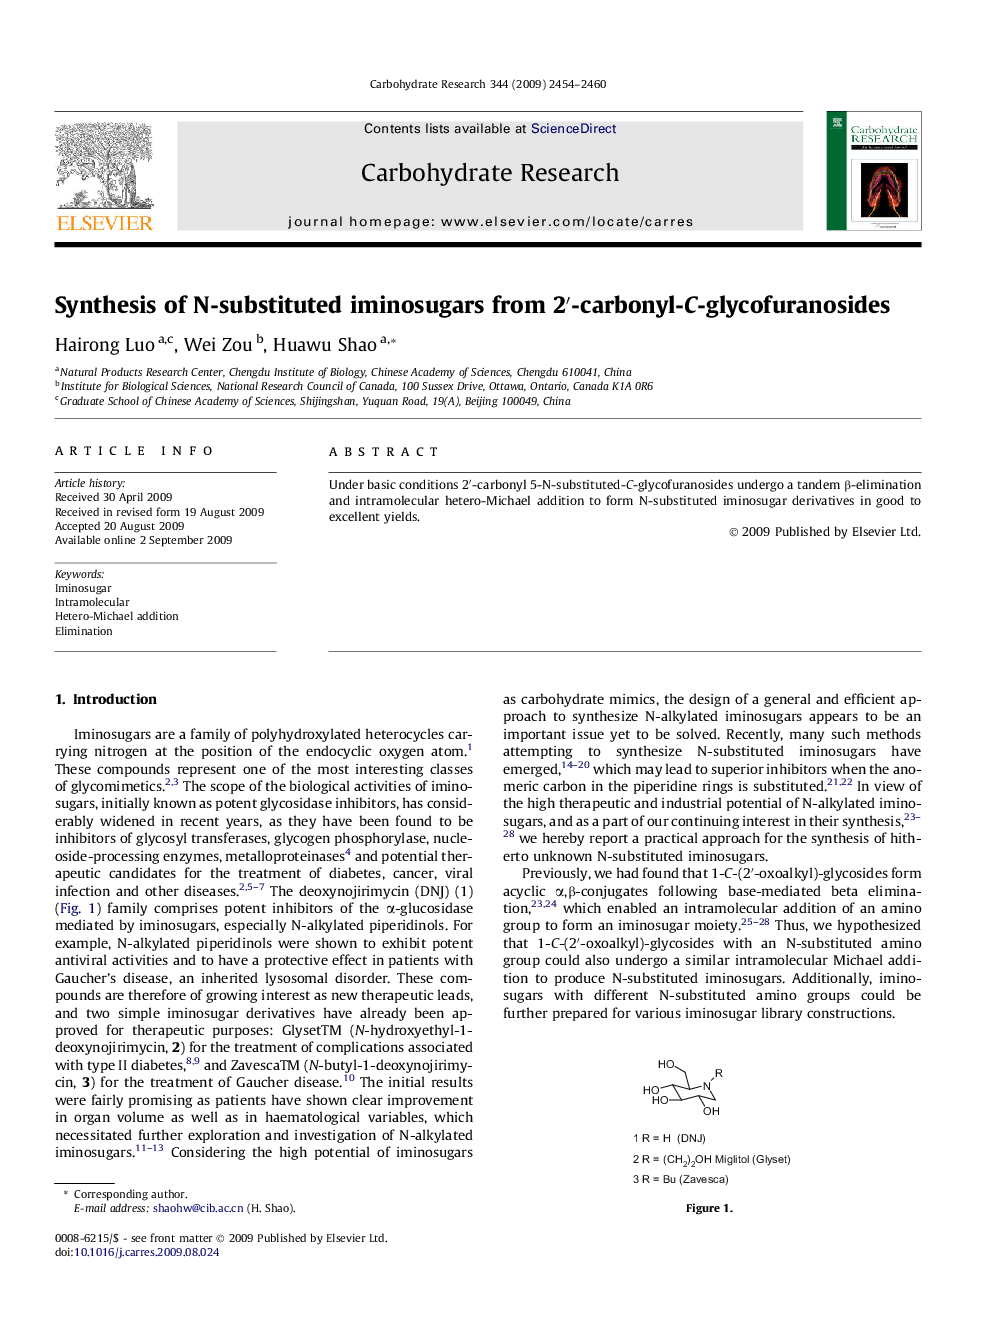 Synthesis of N-substituted iminosugars from 2′-carbonyl-C-glycofuranosides